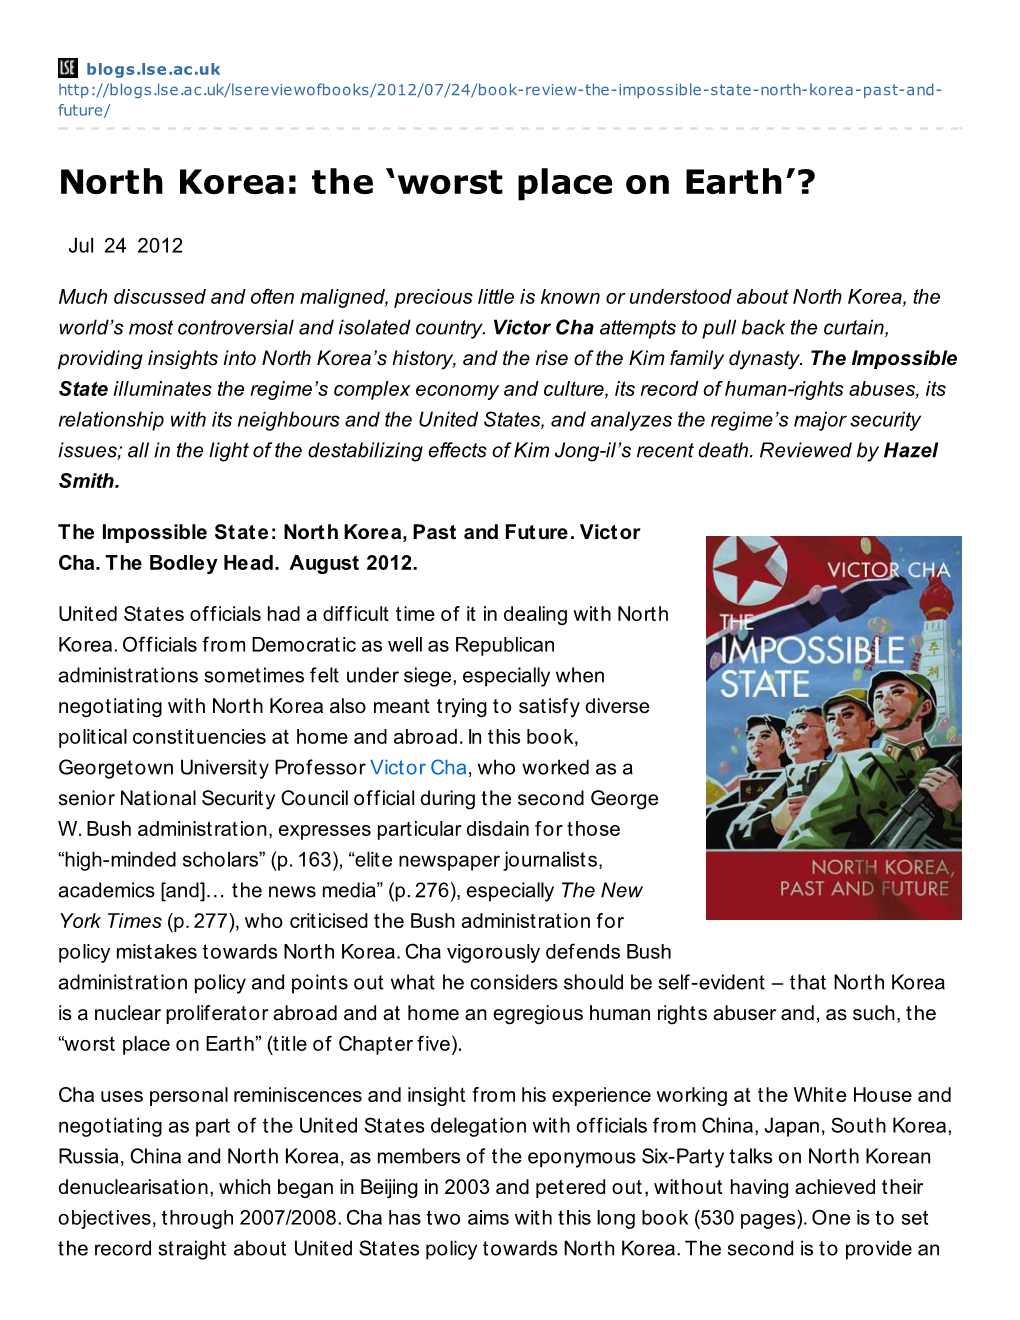 North Korea: the ‘Worst Place on Earth’?